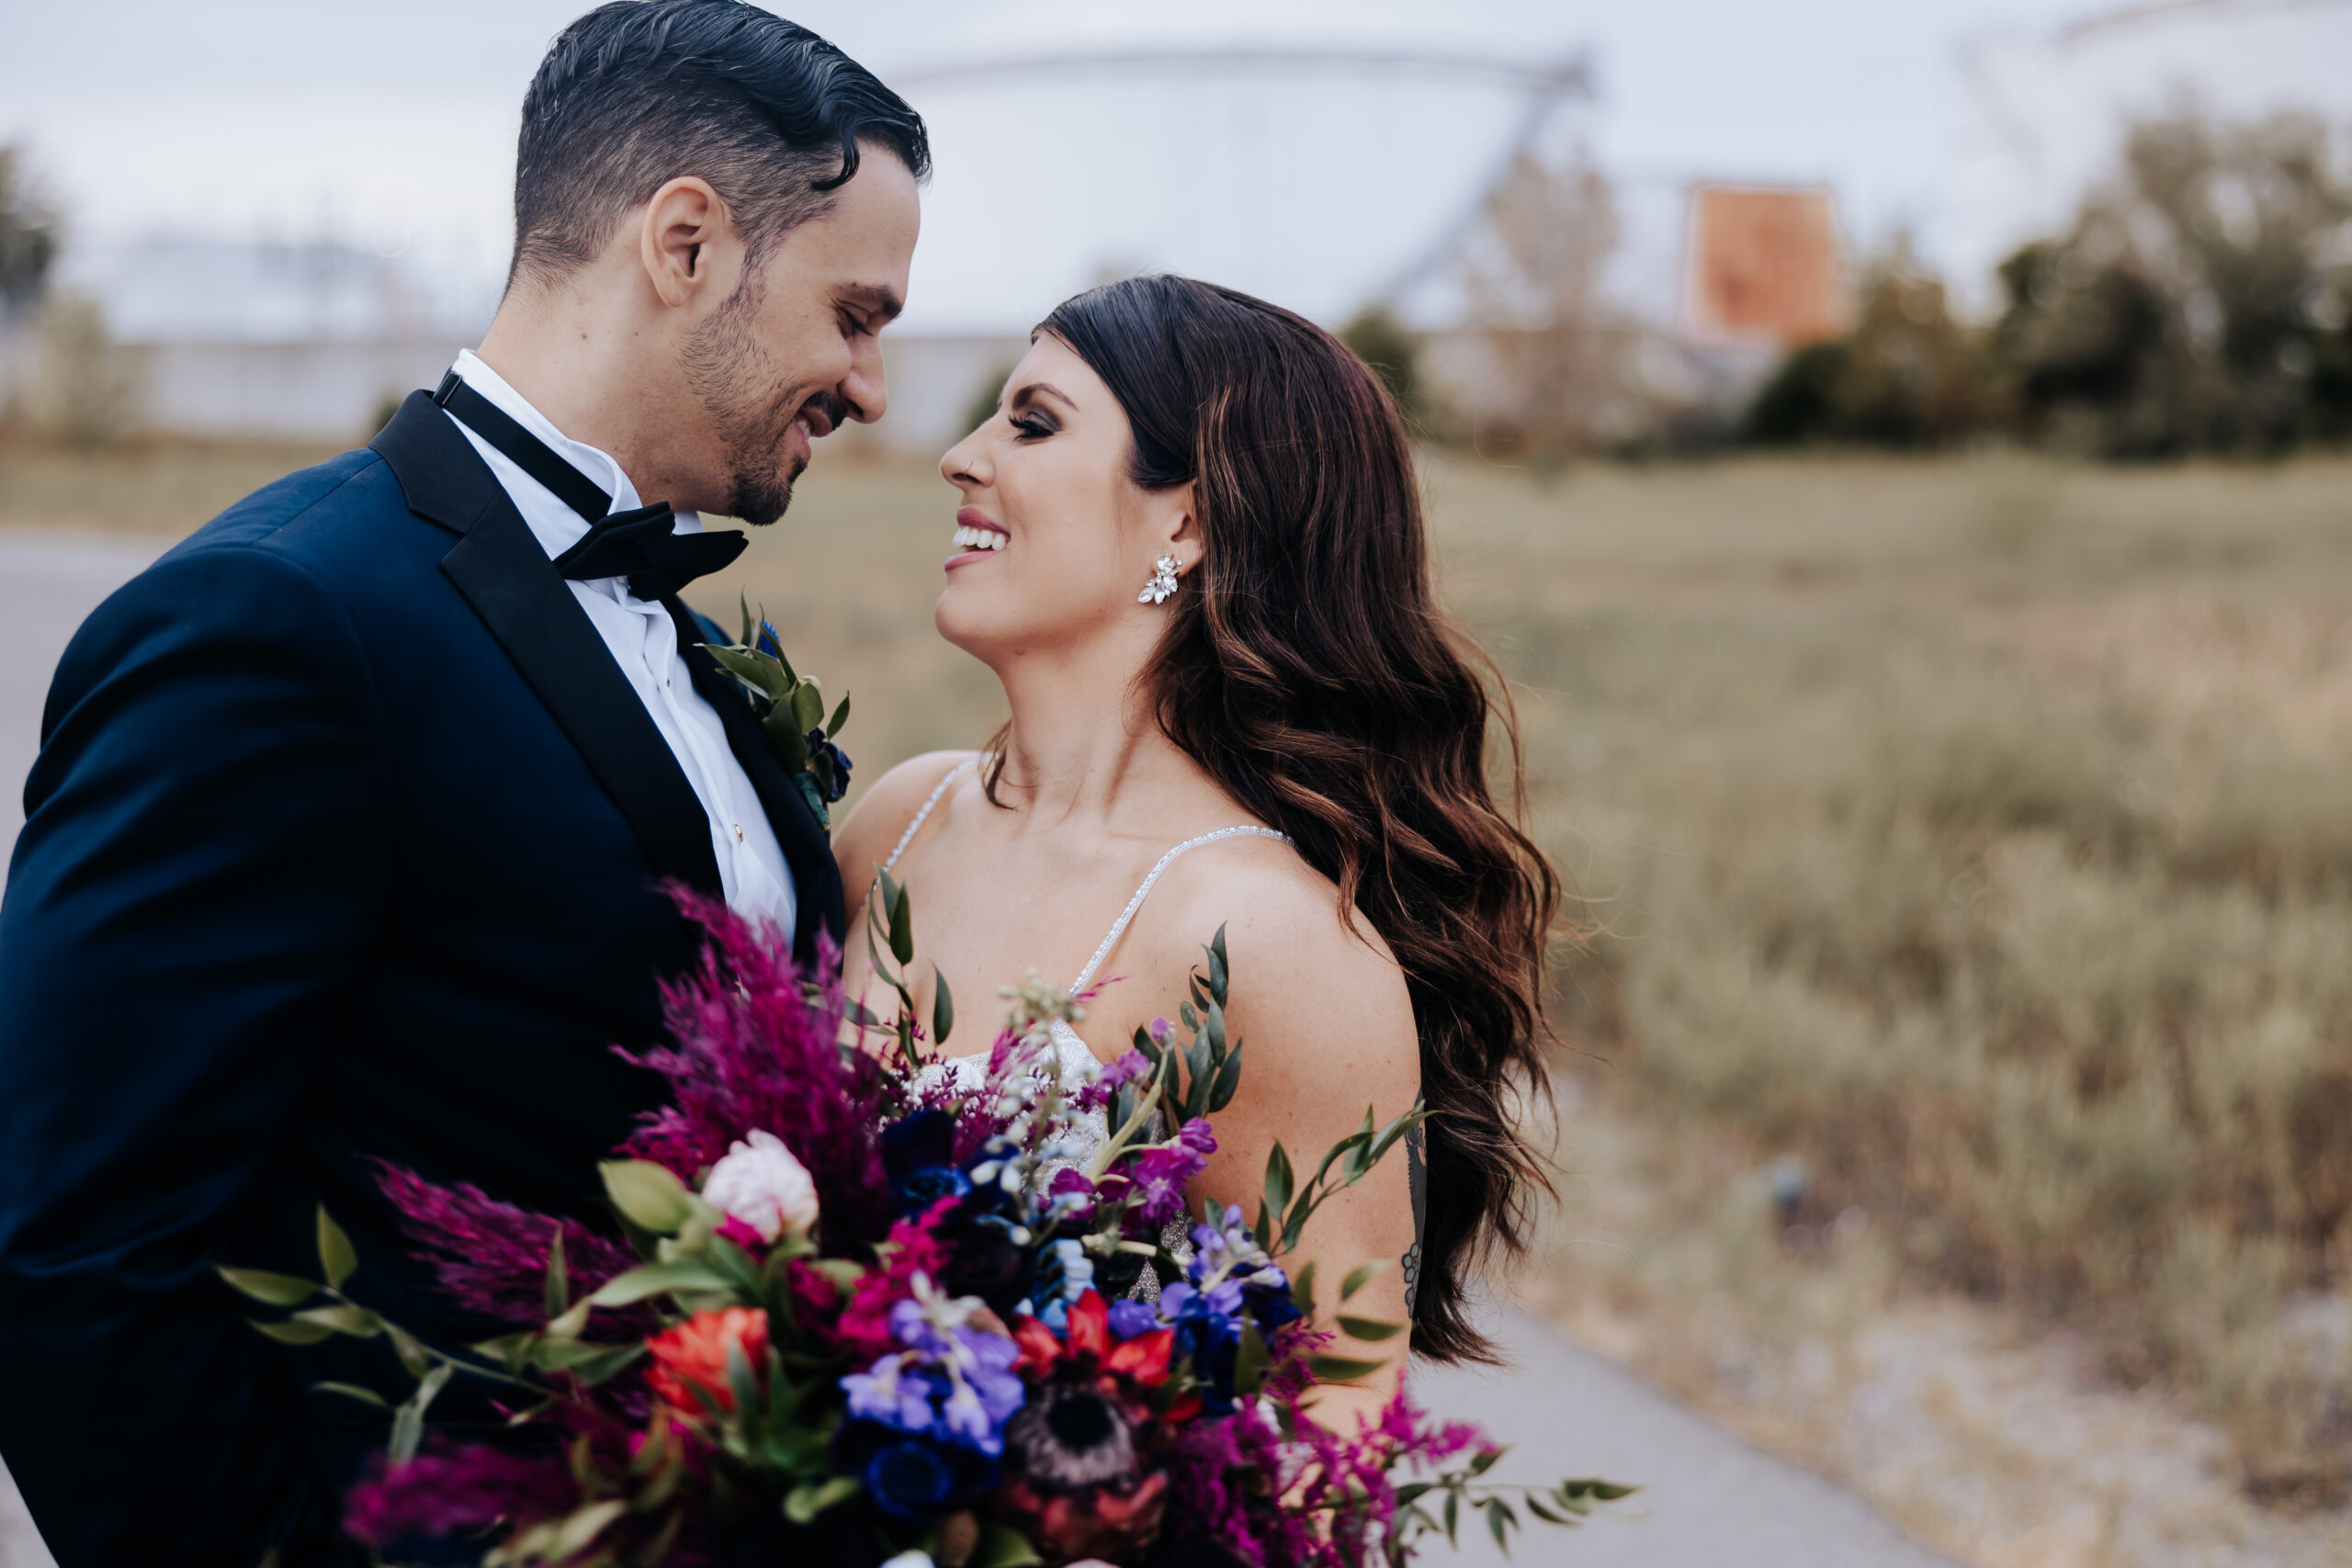 Nashville elopement photographer captures bride and groom smiling at one another after fall wedding